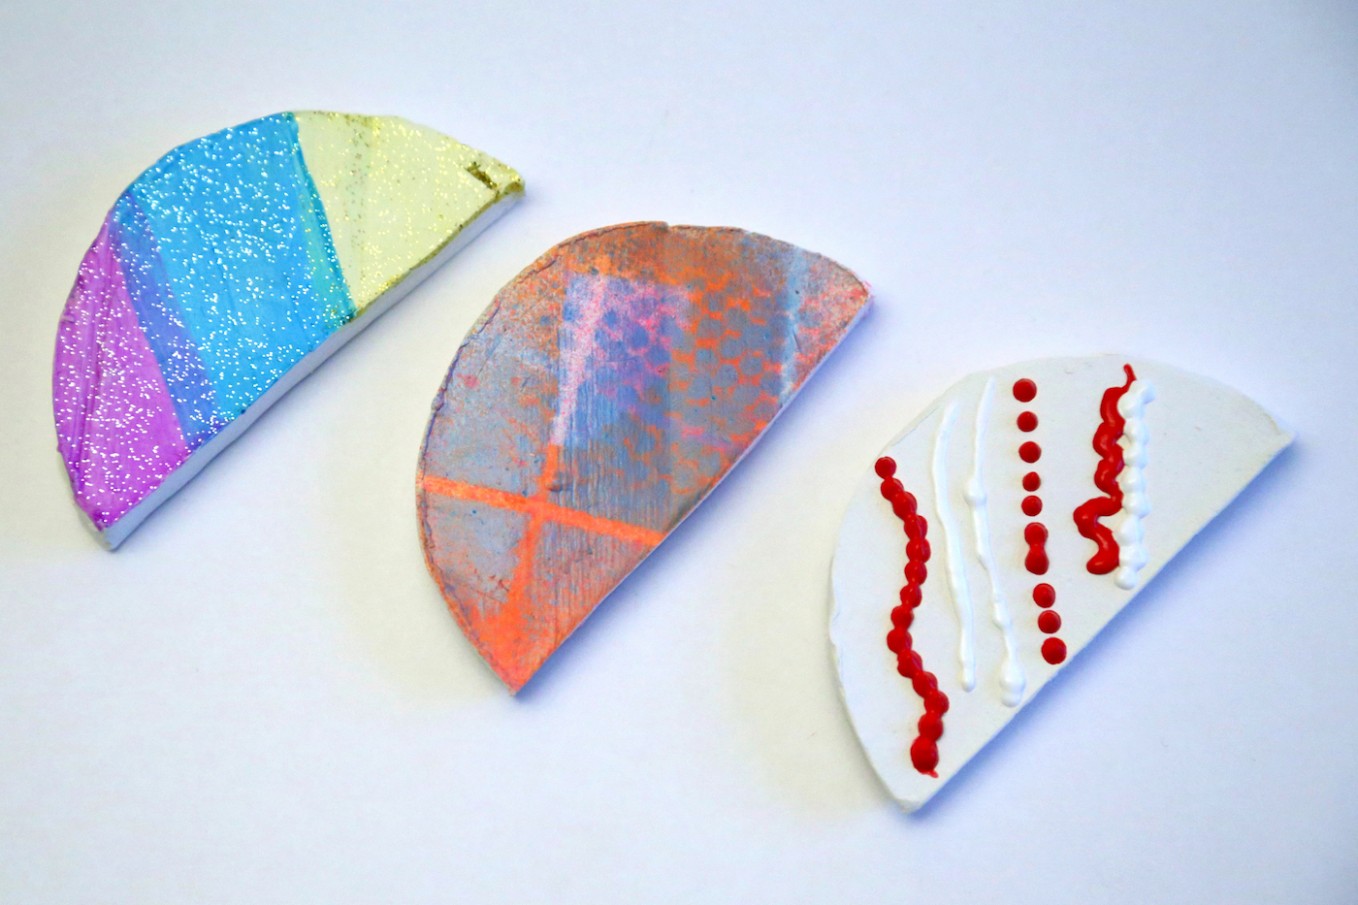 Forget Glazing! 8 Other Innovative Ways To Add Color To Clay ..